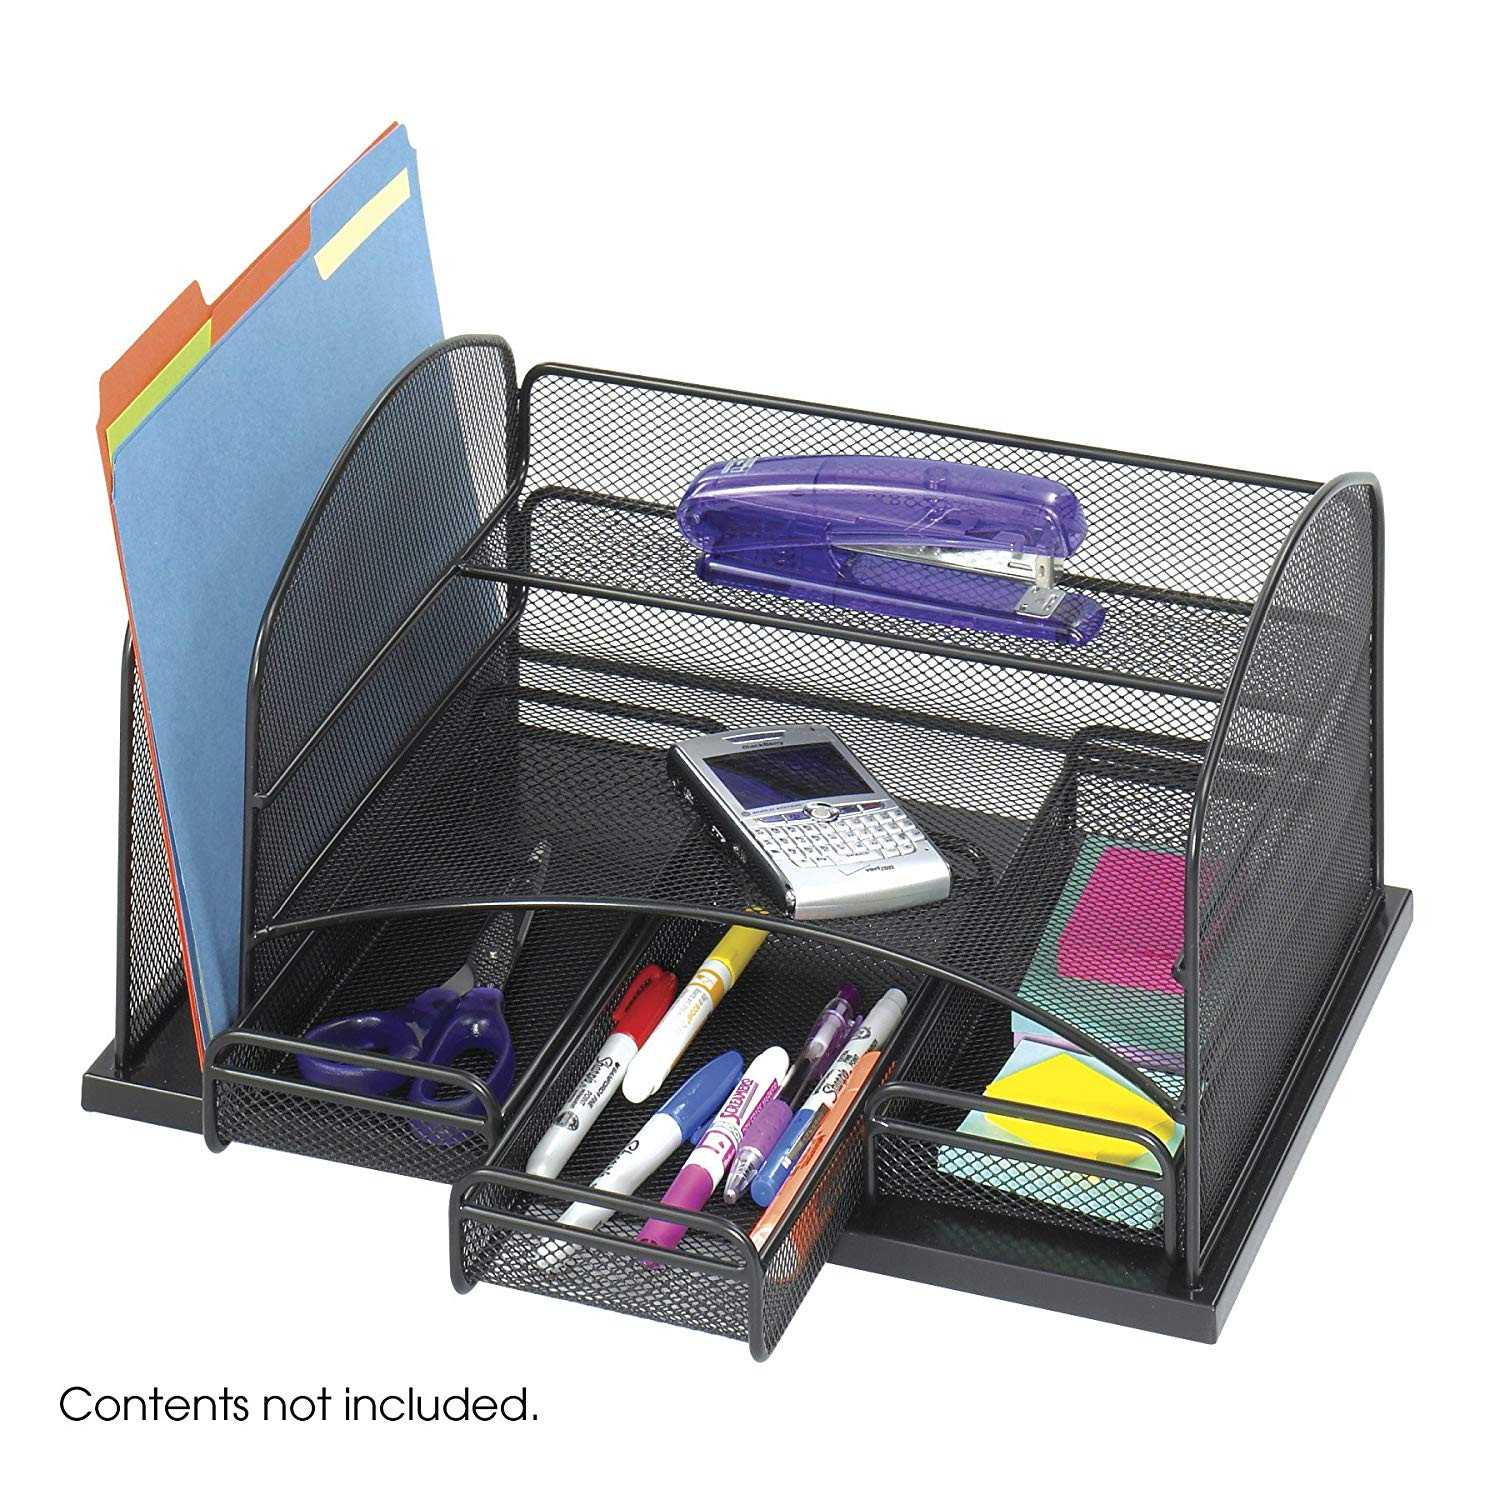 Desk organizer Best Of Safco Products Yx Mesh Desk organizer with 3 Drawers